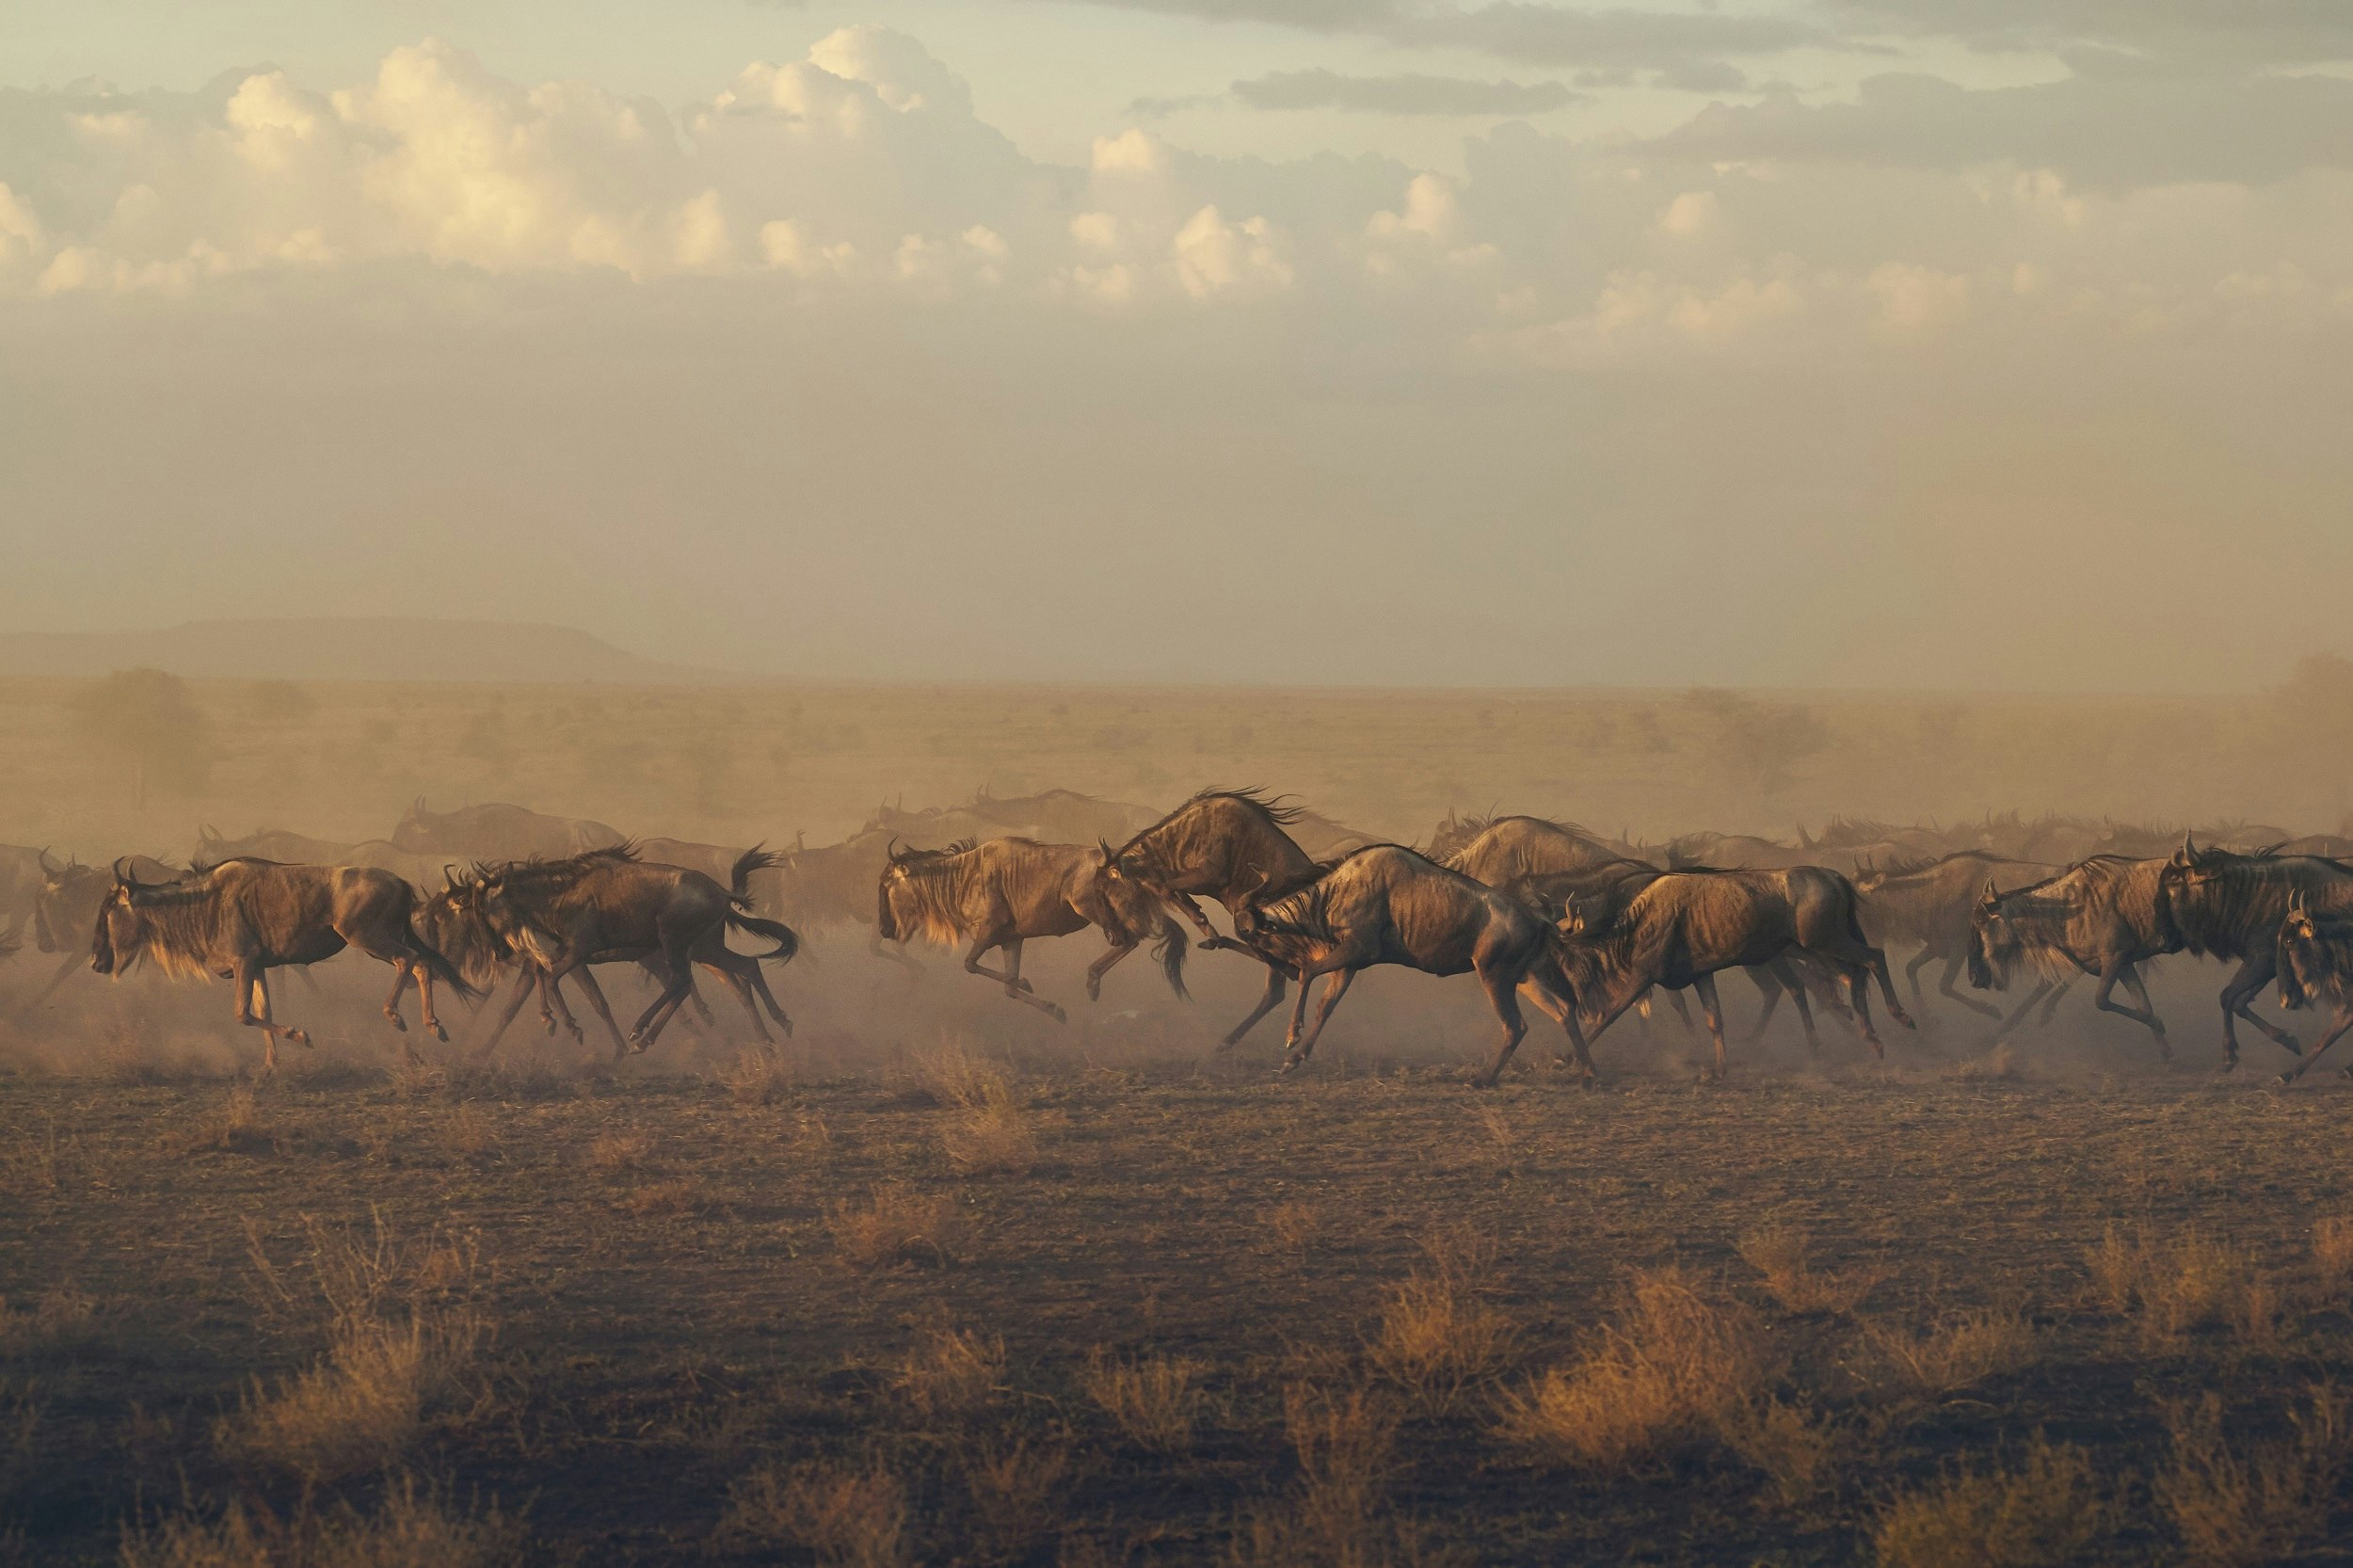 In the early morning light, a herd of wildebeest run across the savannah in the Serengeti.